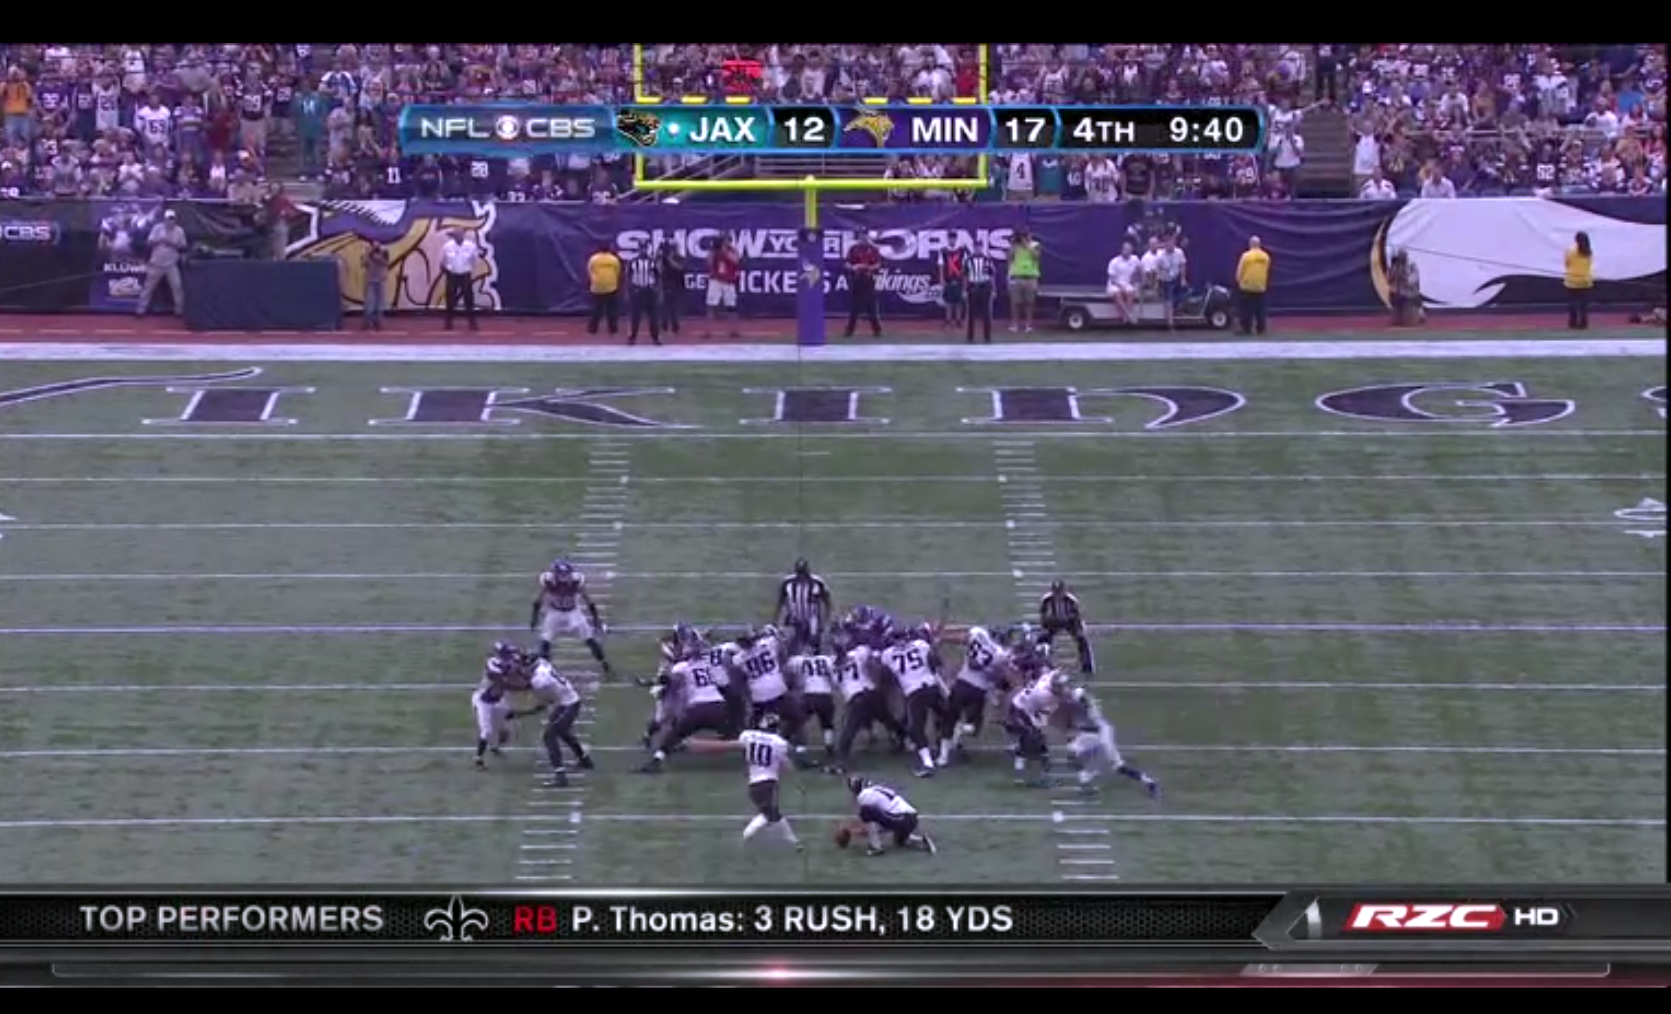 Review NFL Sunday Ticket on PS3, iPad, and Online